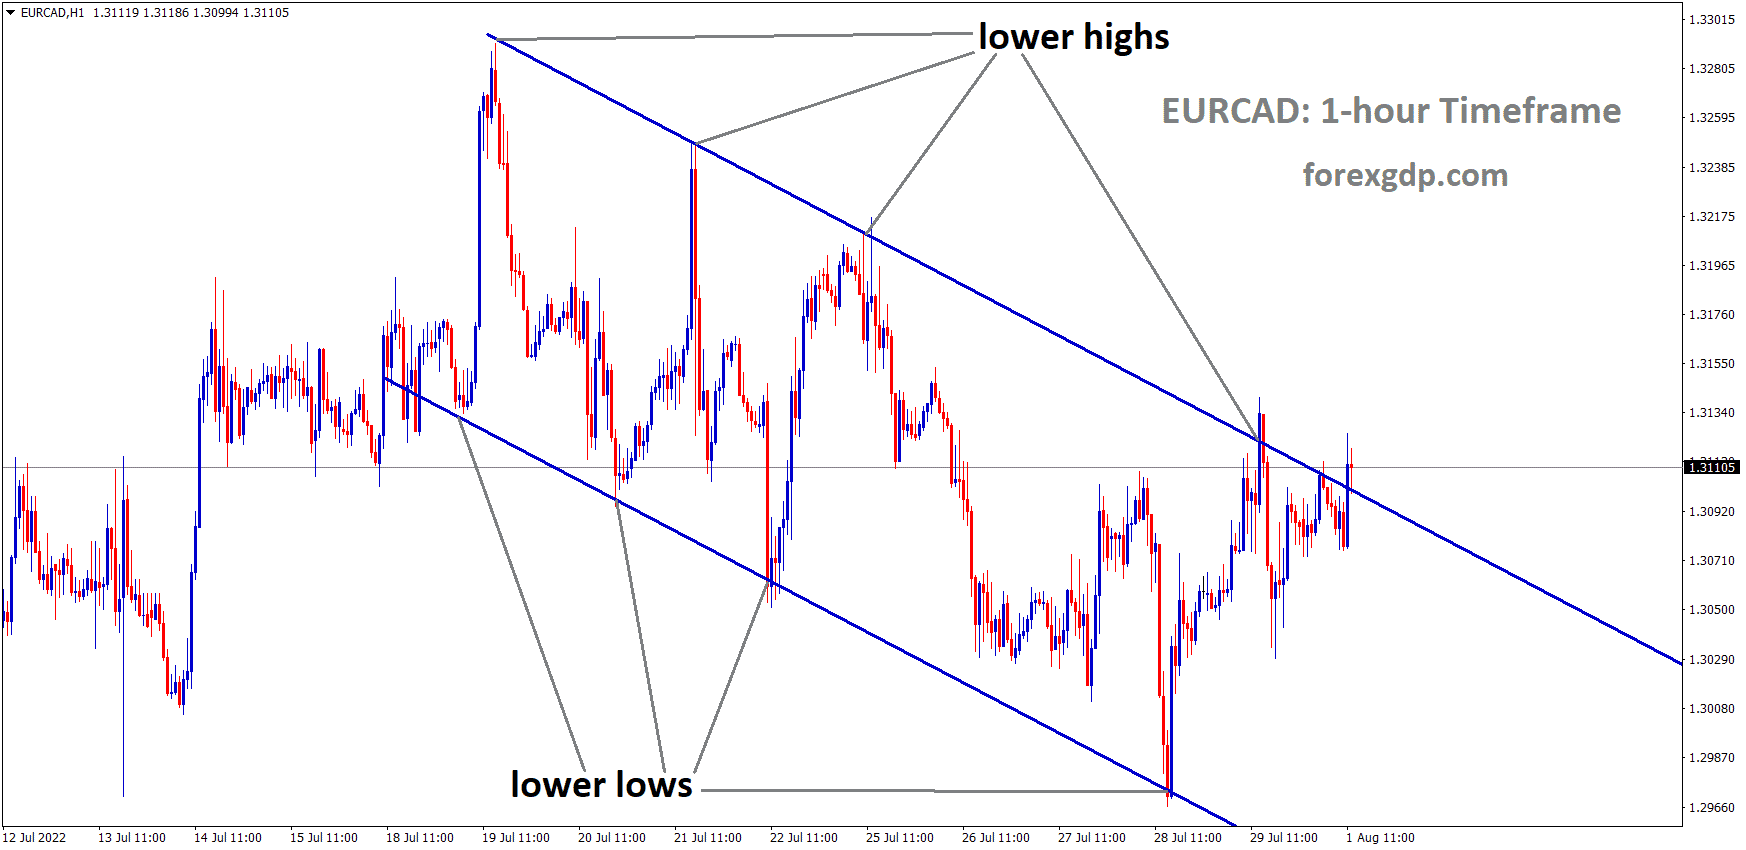 EURCAD is moving in the Descending channel and the Market has reached the lower high area of the Channel.